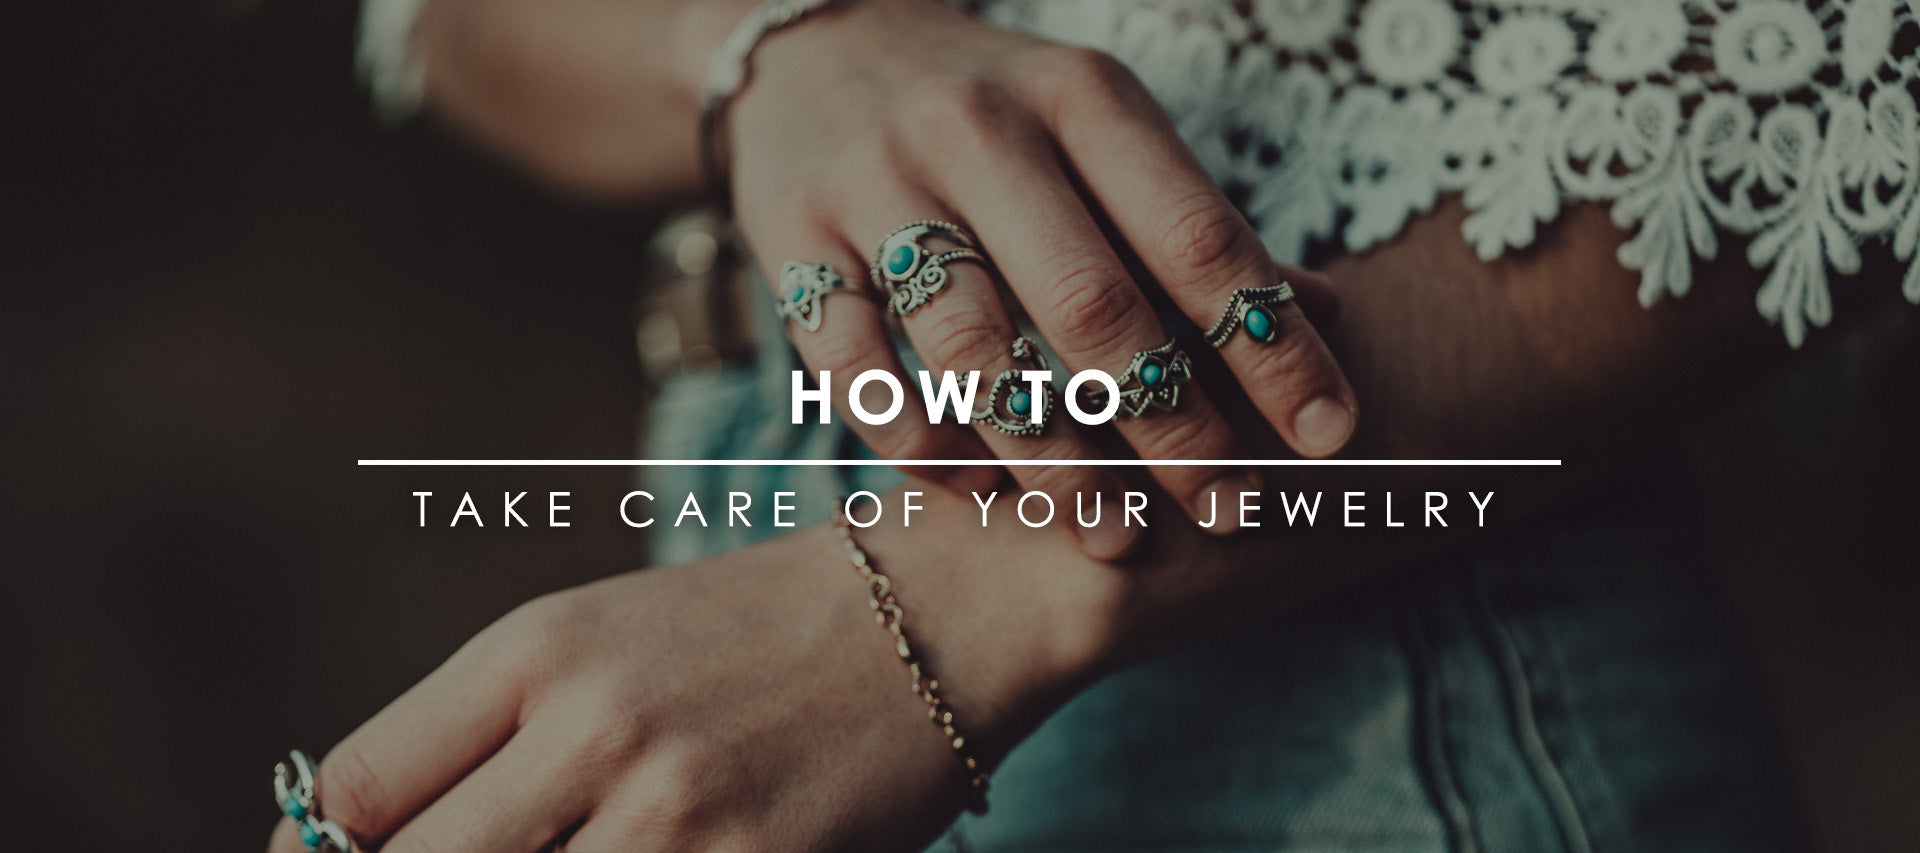 How to Take Care of Your Jewelry - Roam Often